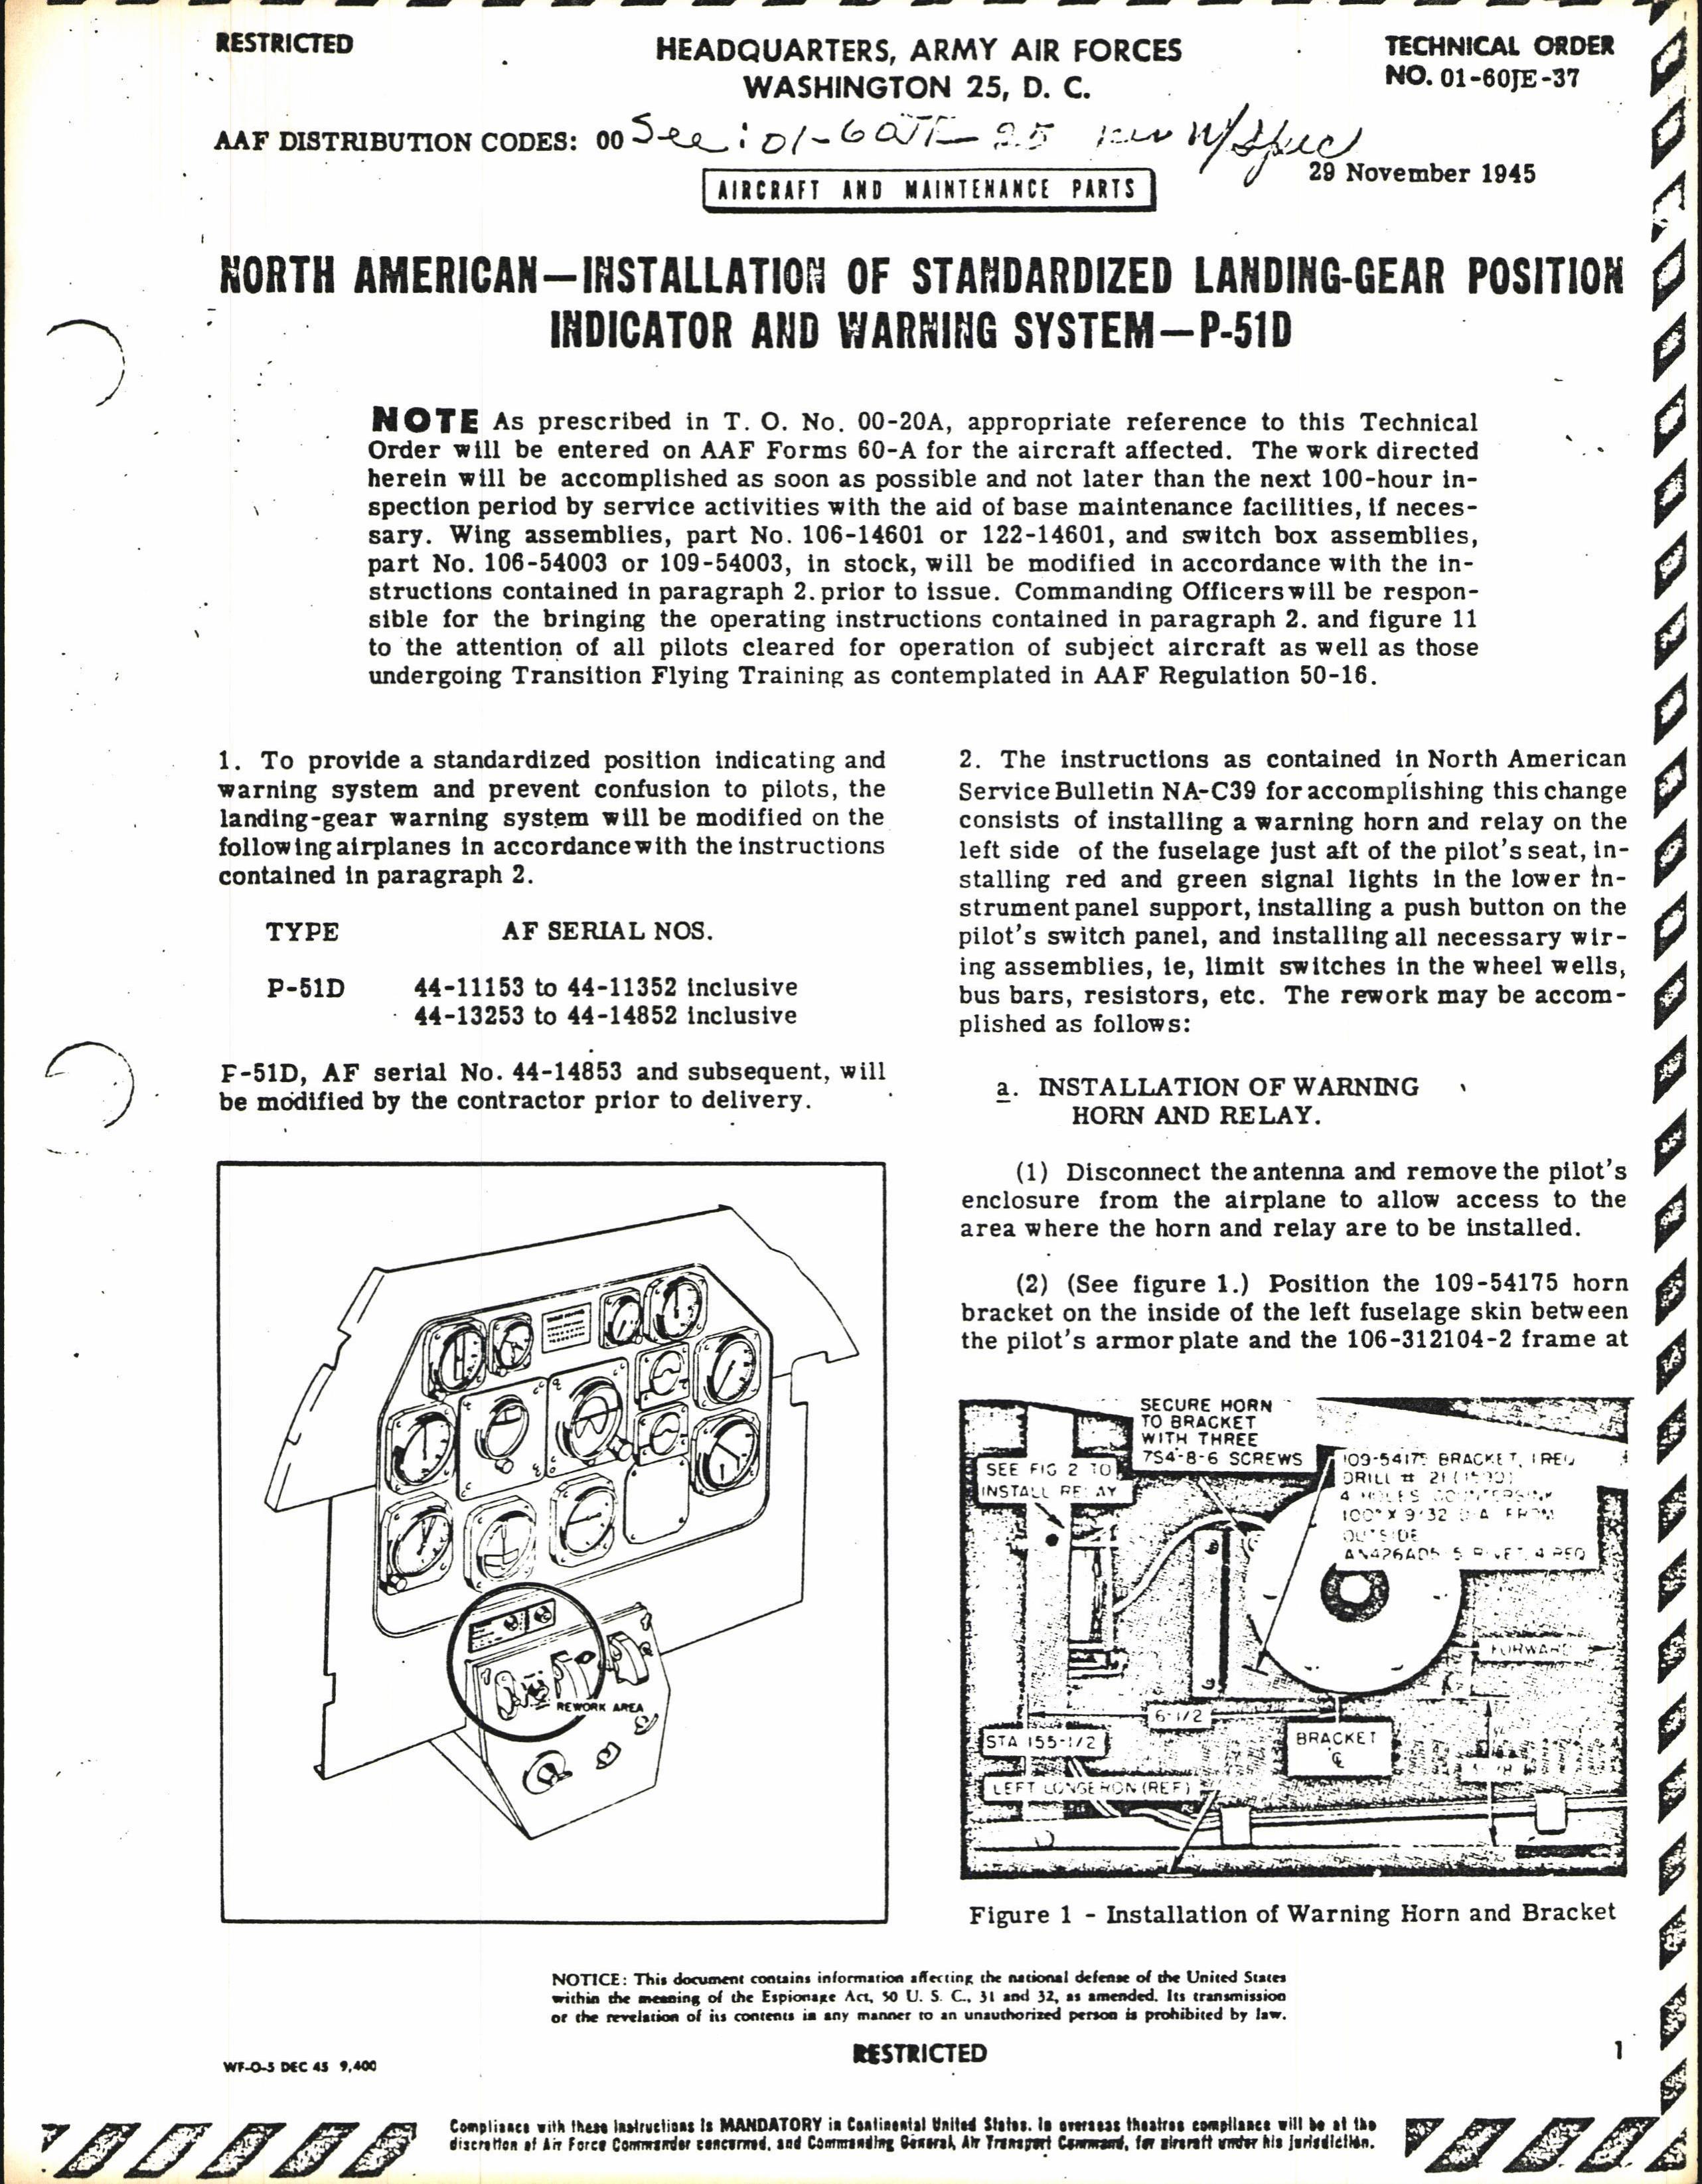 Sample page 1 from AirCorps Library document: Installation of Standardized Landing-Gear Position Indicator and Warning System for P-51D